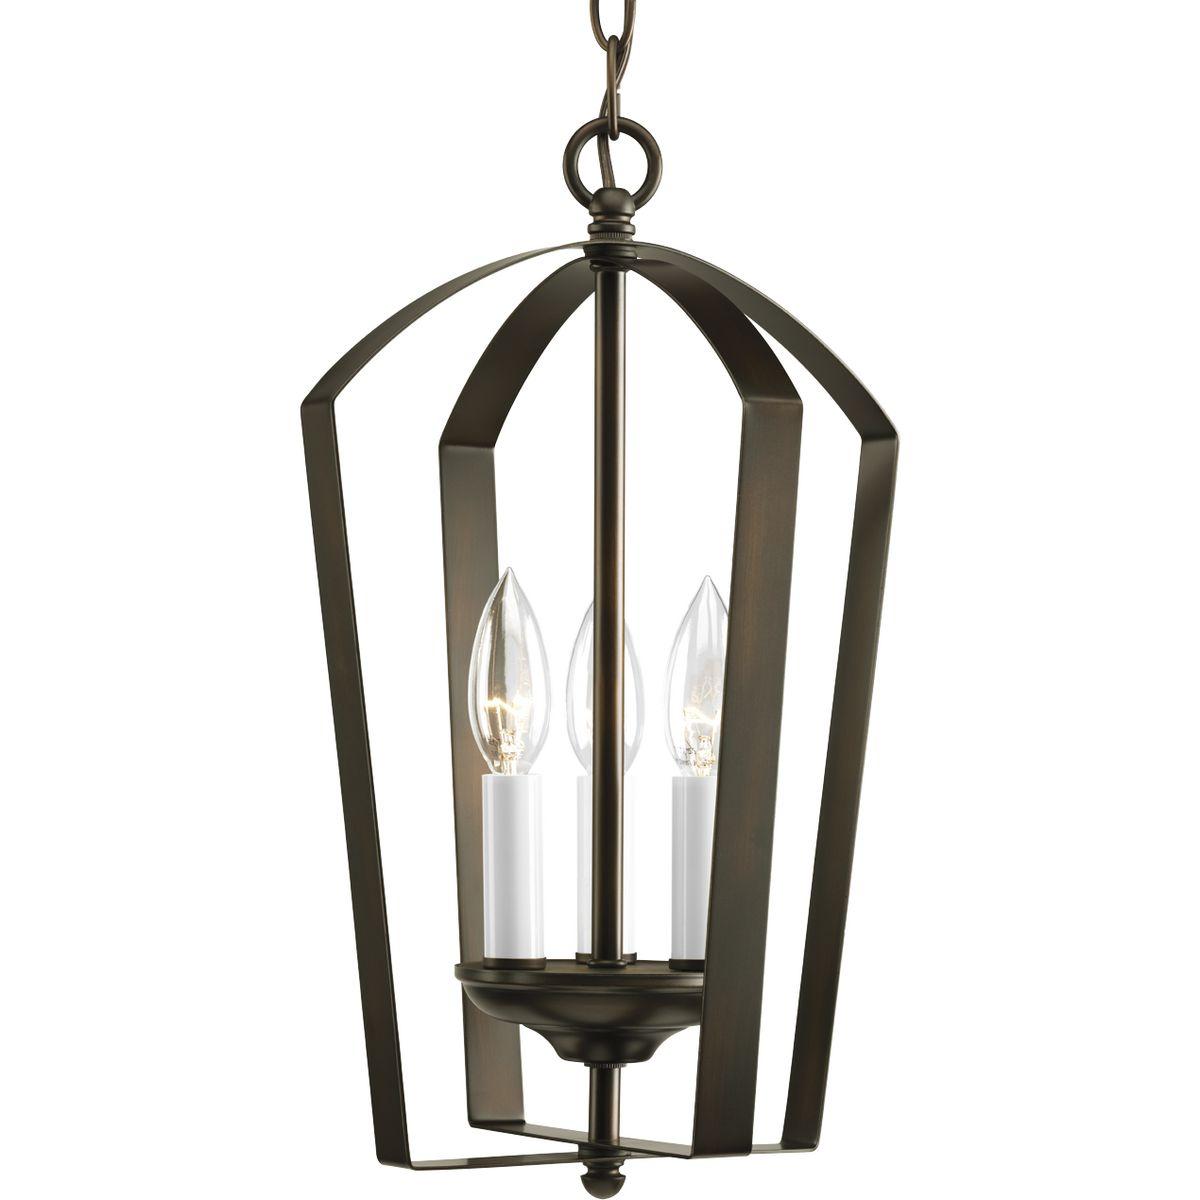 Hubbell P3928-20 Gather possesses a smart simplicity to complement today's home. This three-light foyer fixture contains both white and matching finish candle sleeves which add distinction and elegance to your room. Featuring a glamorous Antique Bronze finished frame, thi